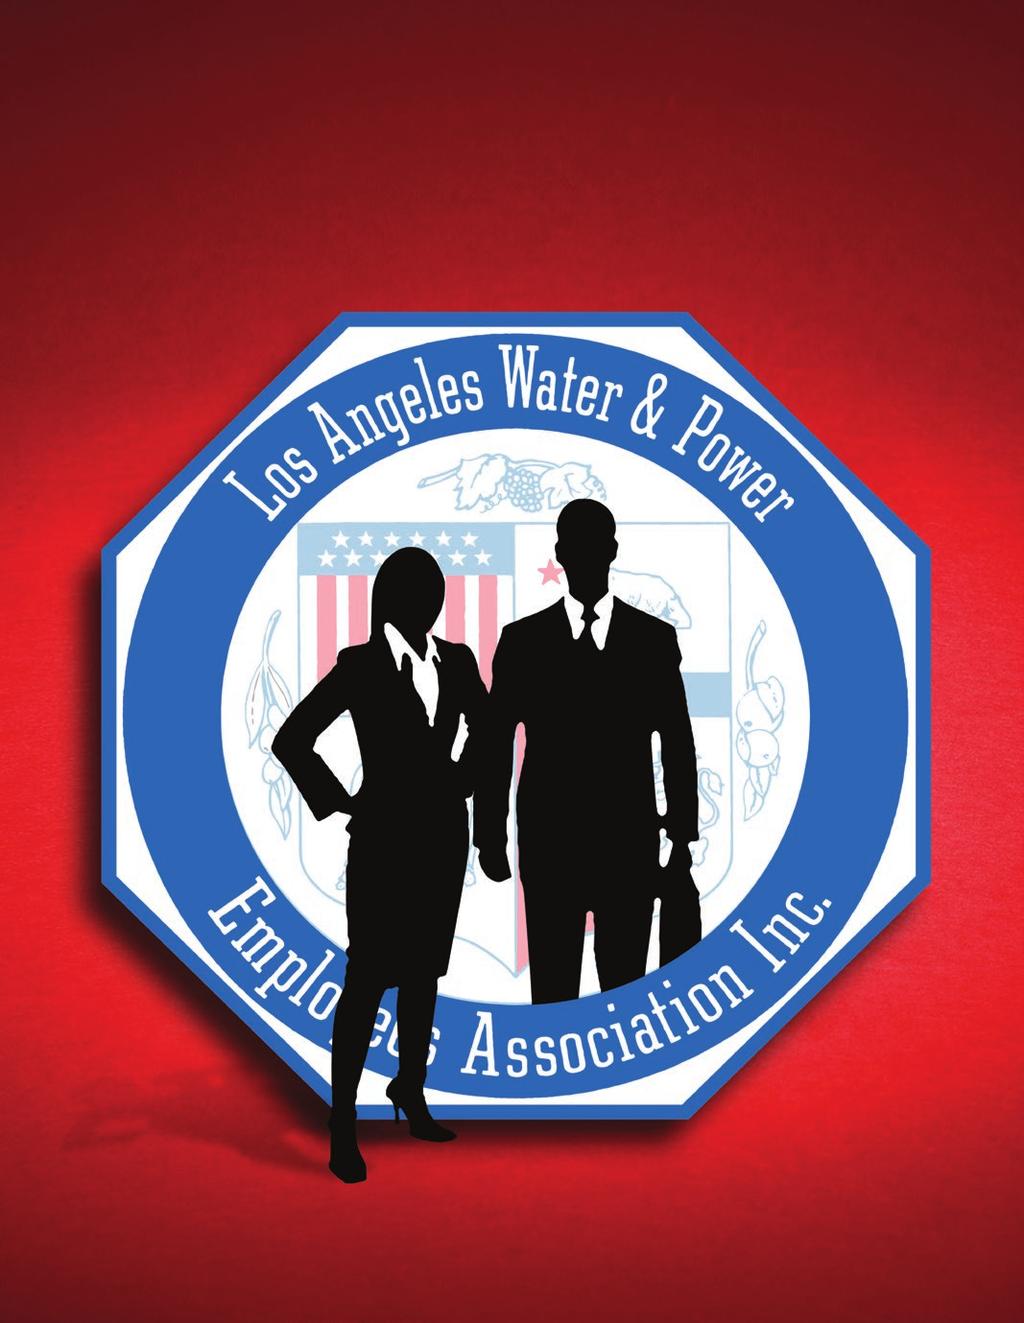 EMPLOYEES LOS ANGELES WATER & POWER ASSOCIATION REPORT FEBRUARY 2014 LOS ANGELES WATER